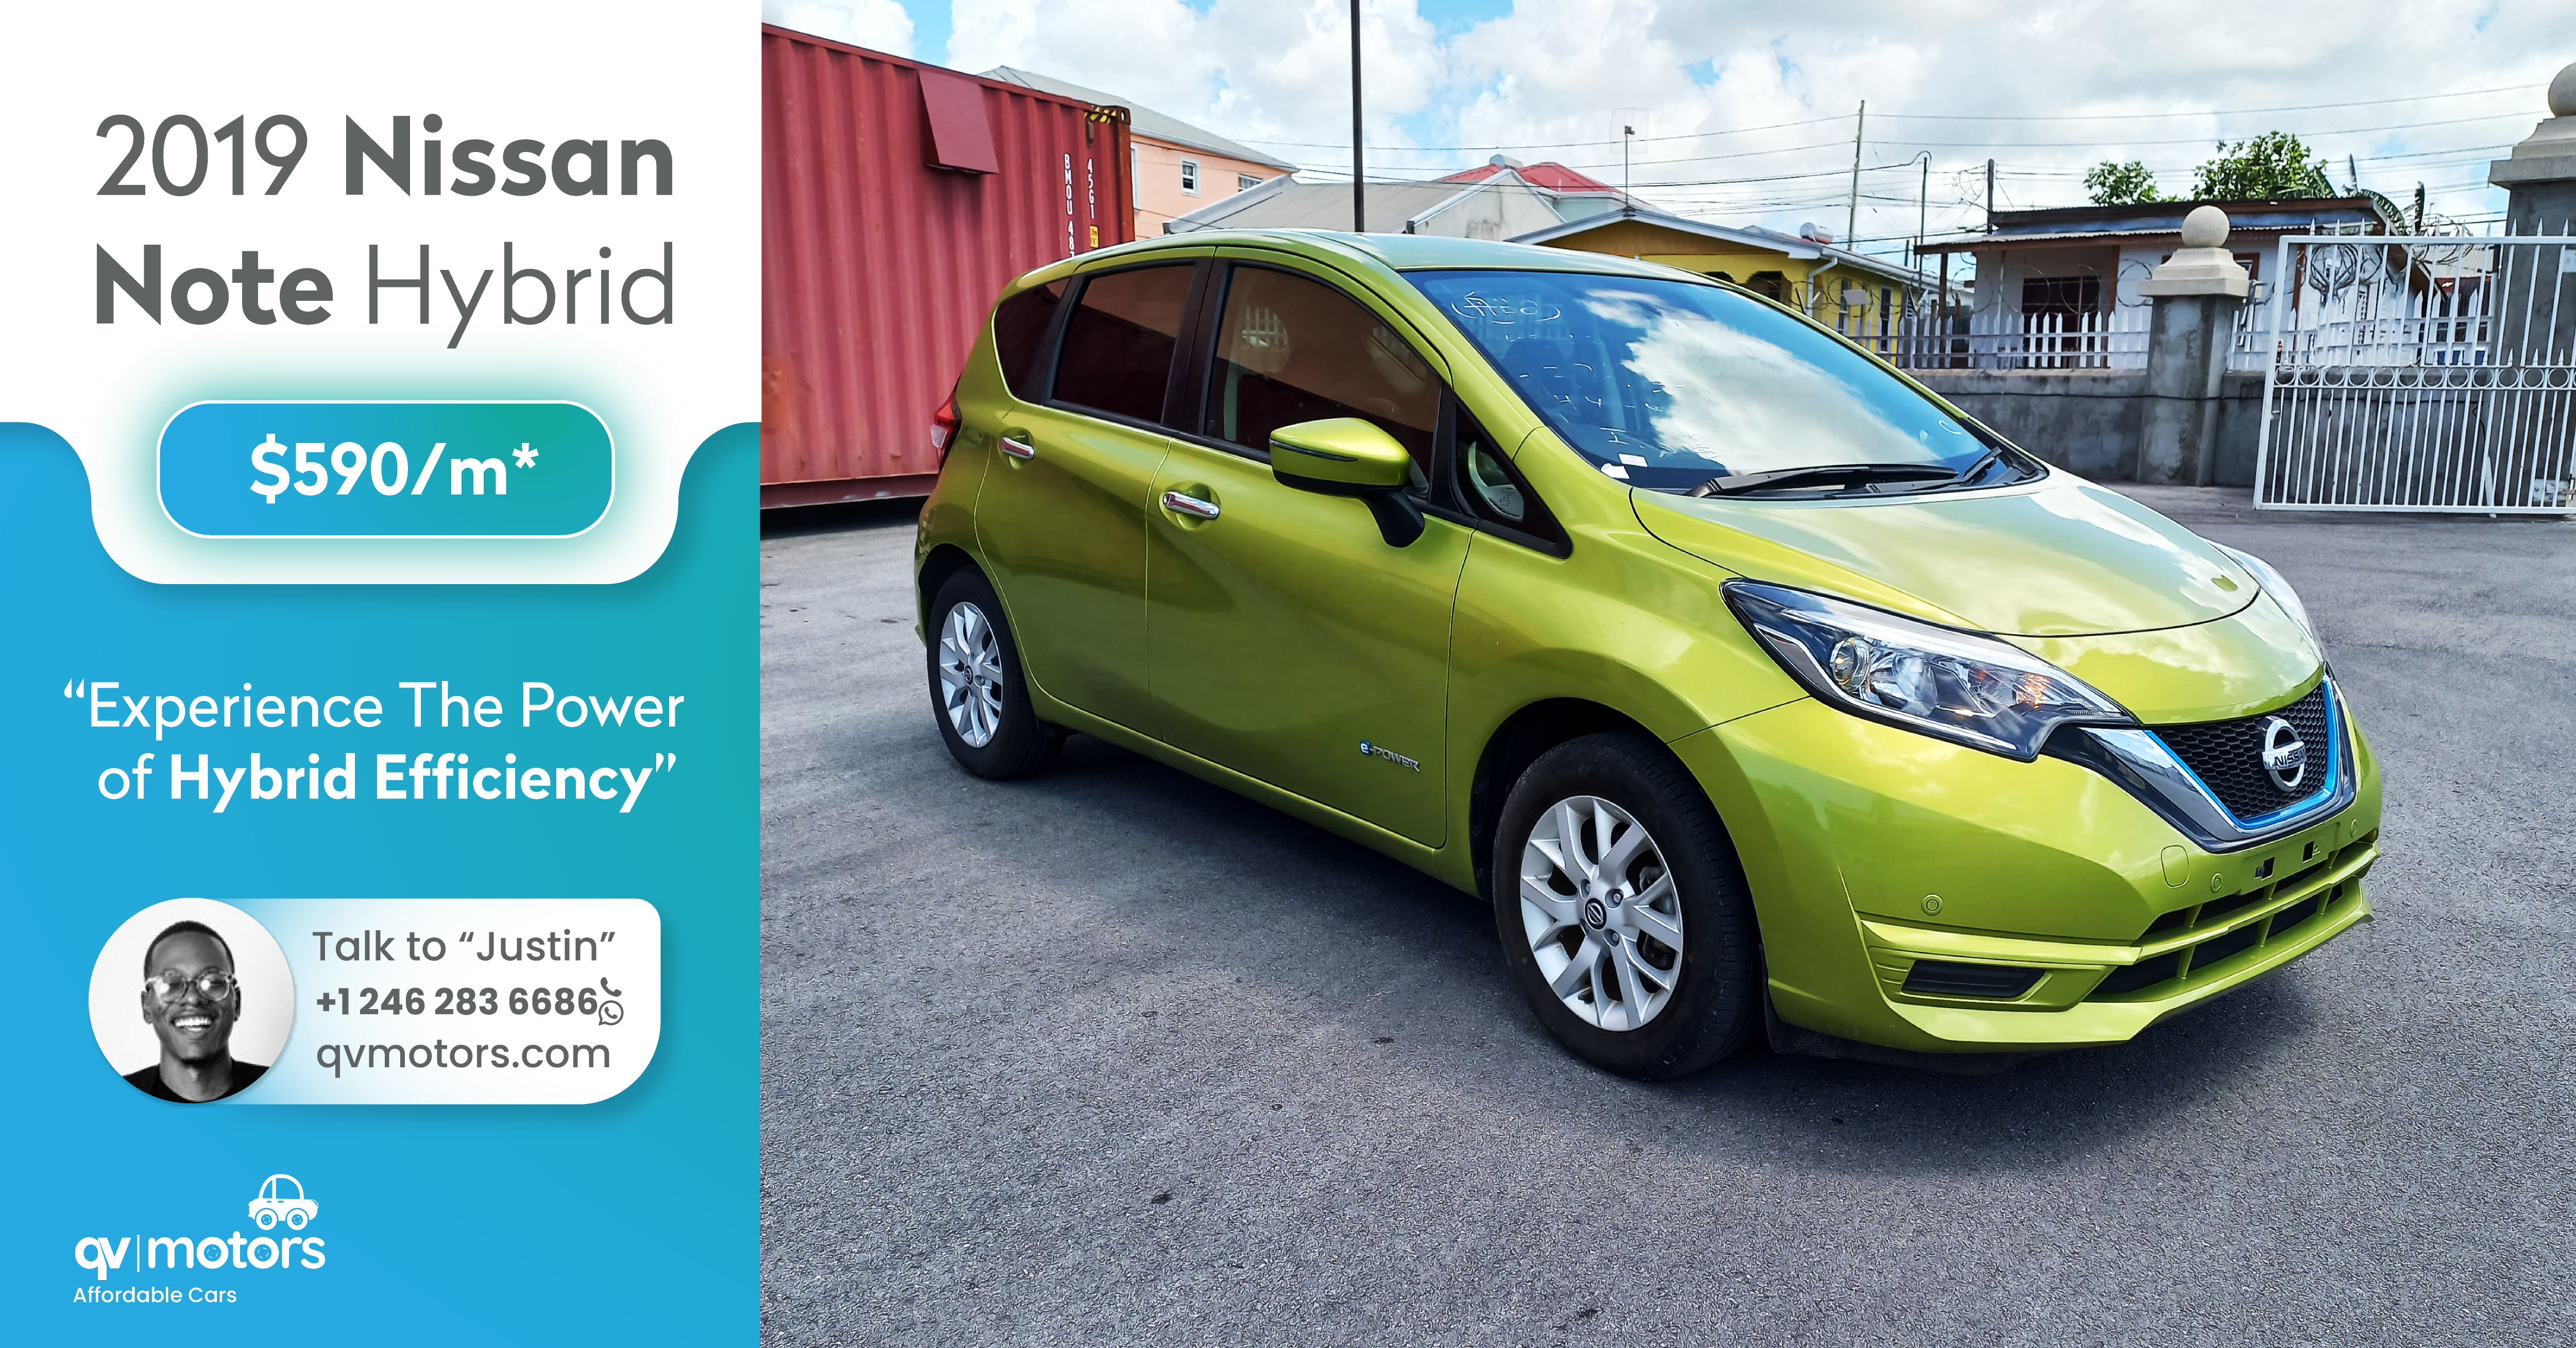 2019 Nissan Note Hybrid – Save Up to 50% on Gas!